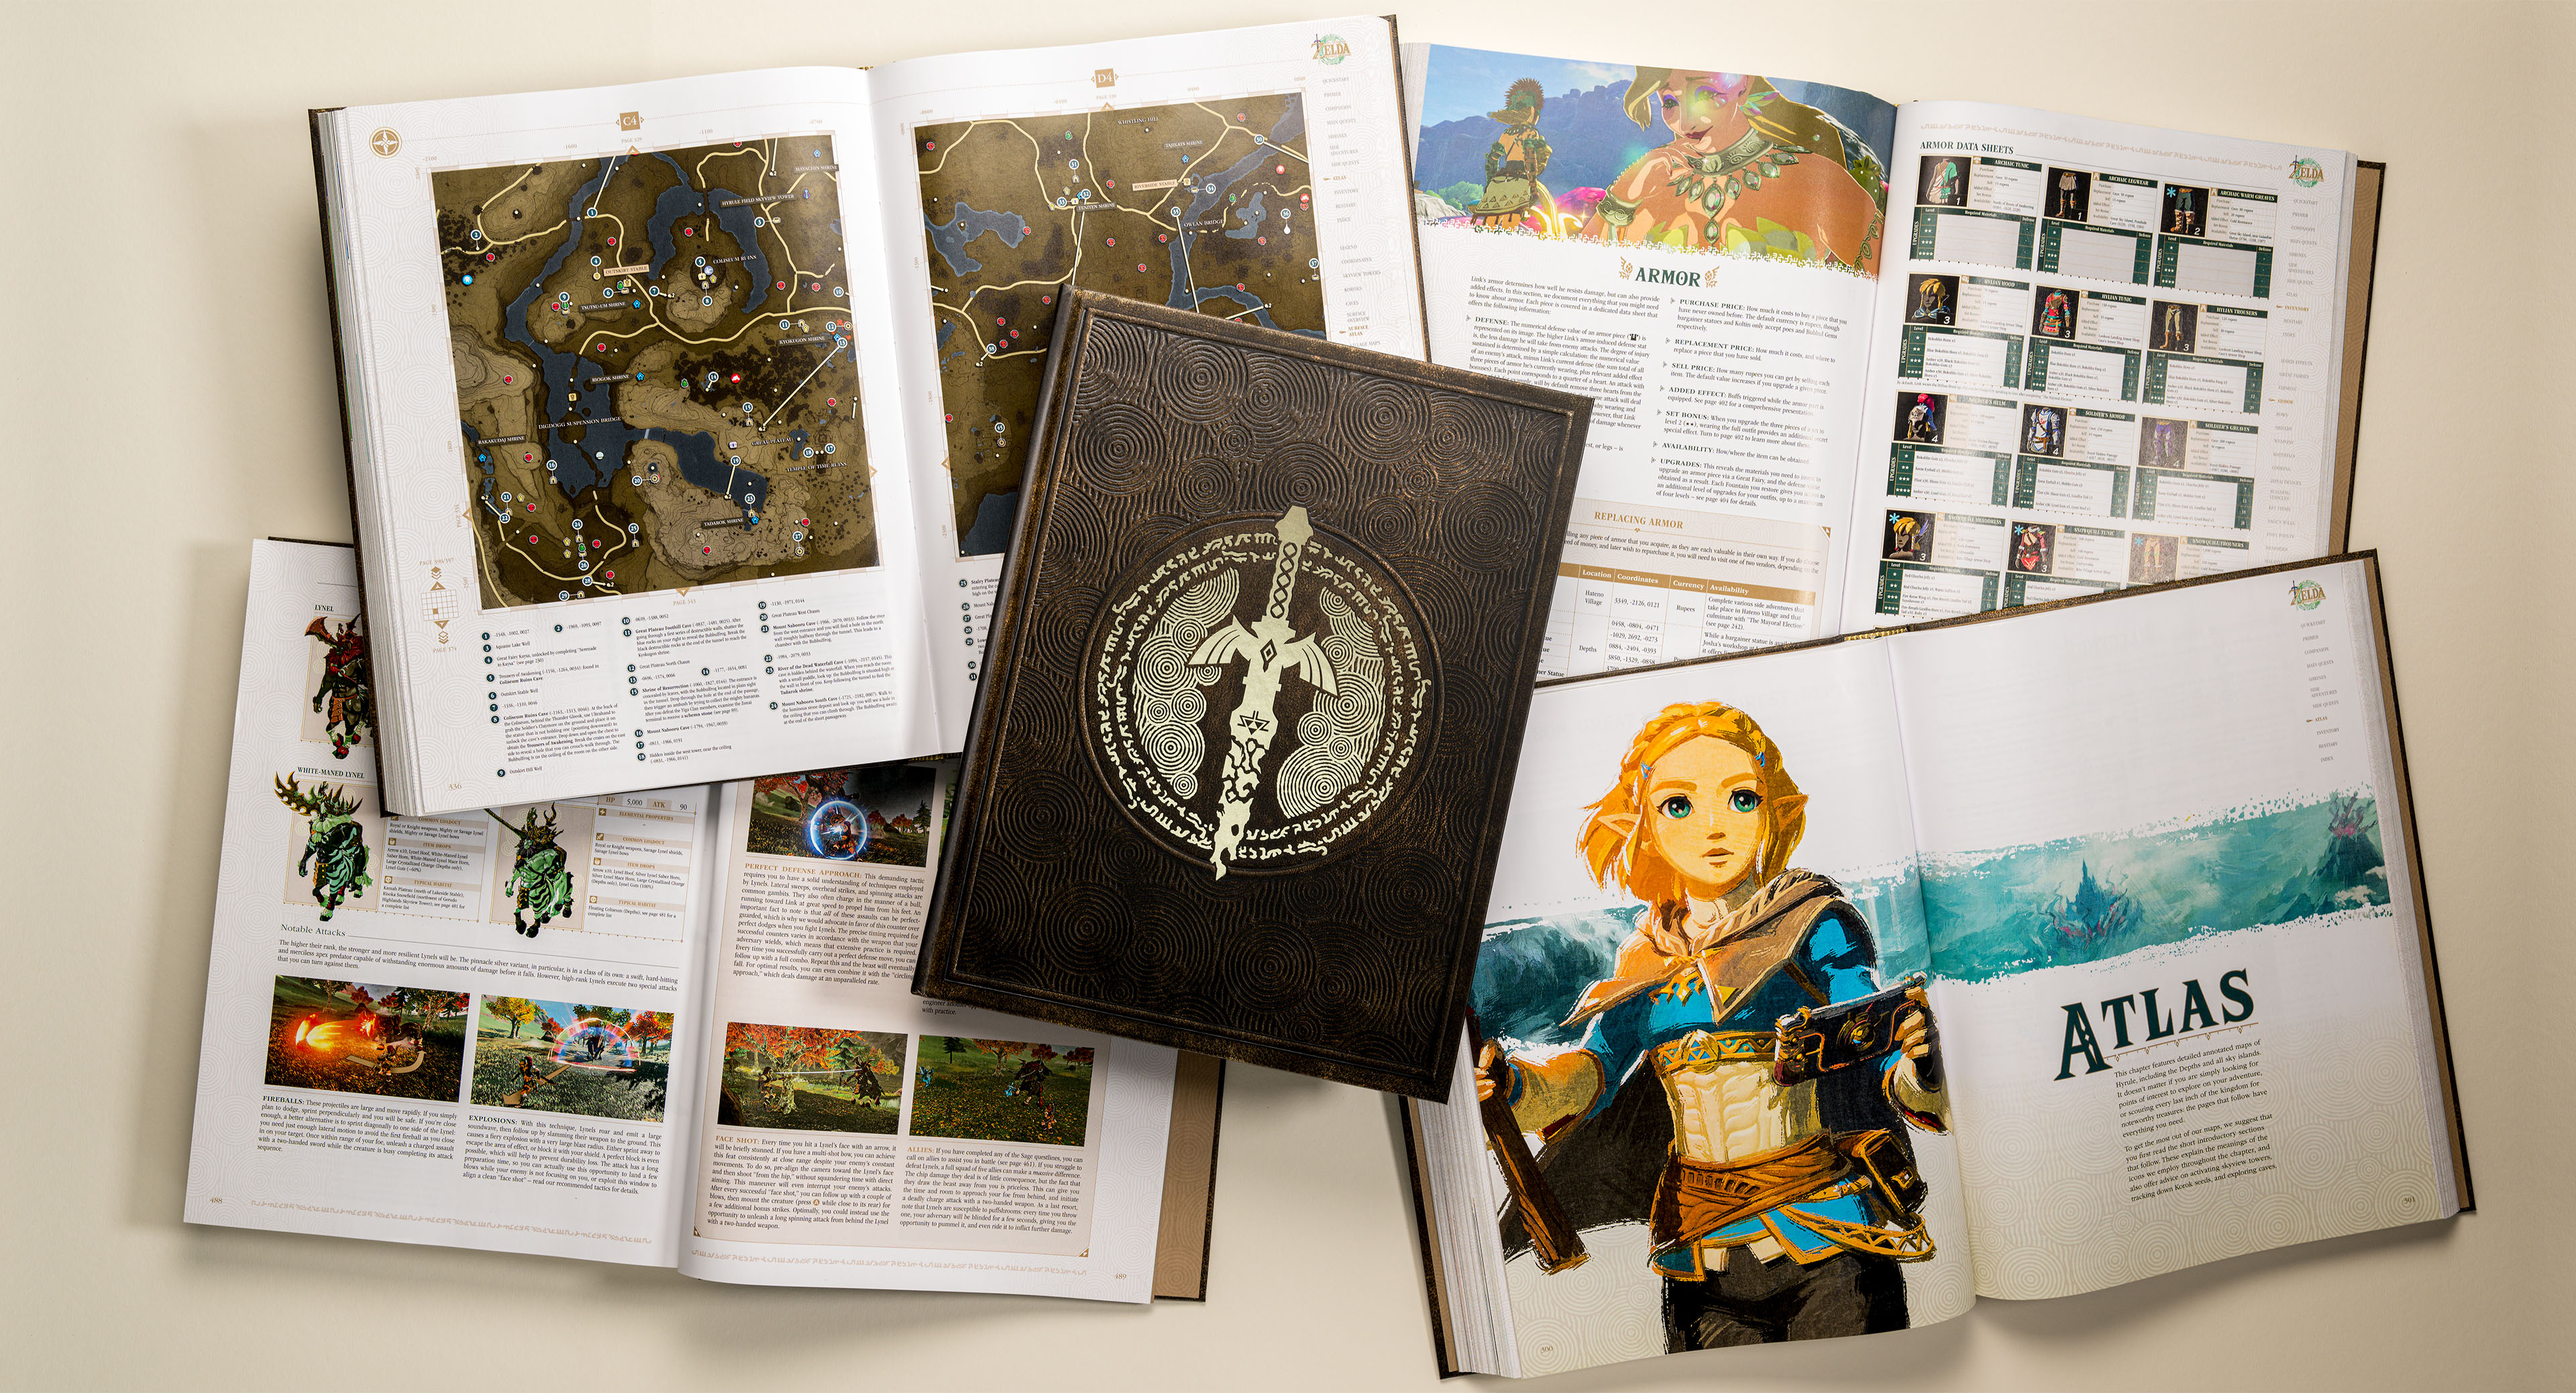 Have a look at The Legend of Zelda: Breath of the Wild - Master and Special  Editions